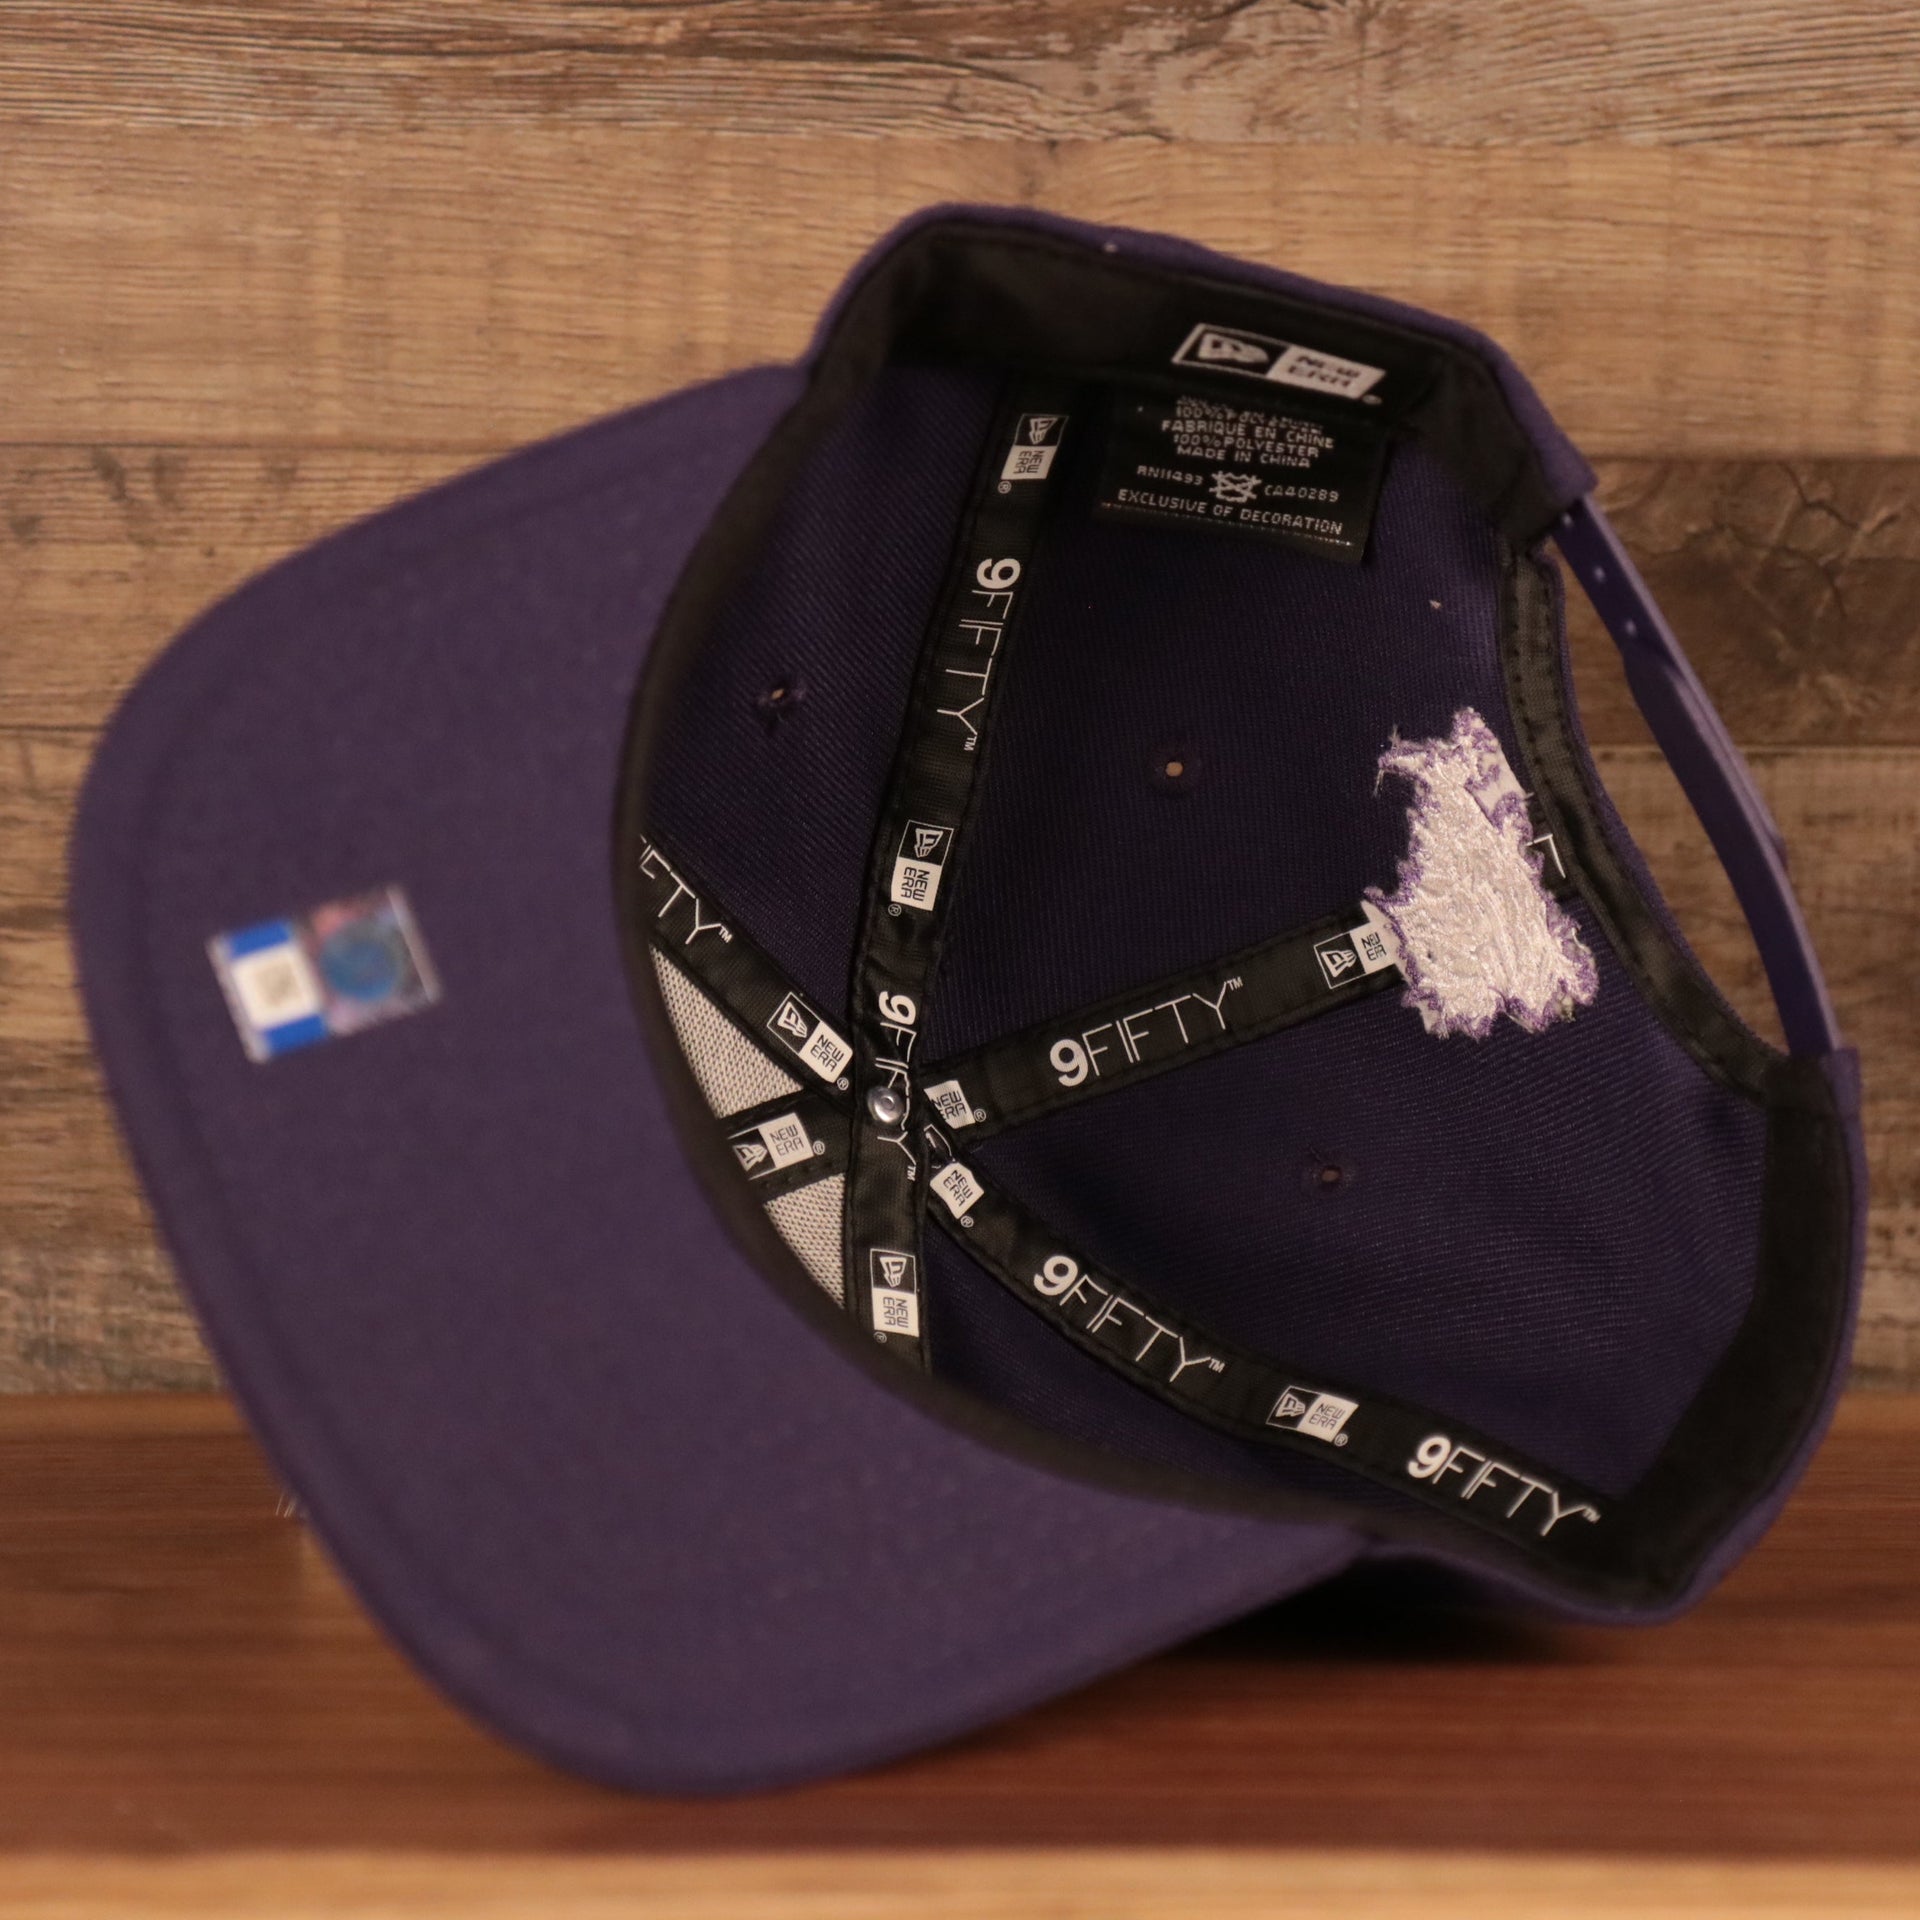 under view of the TCU Horned Frogs Purple Adjustable Snapback Cap